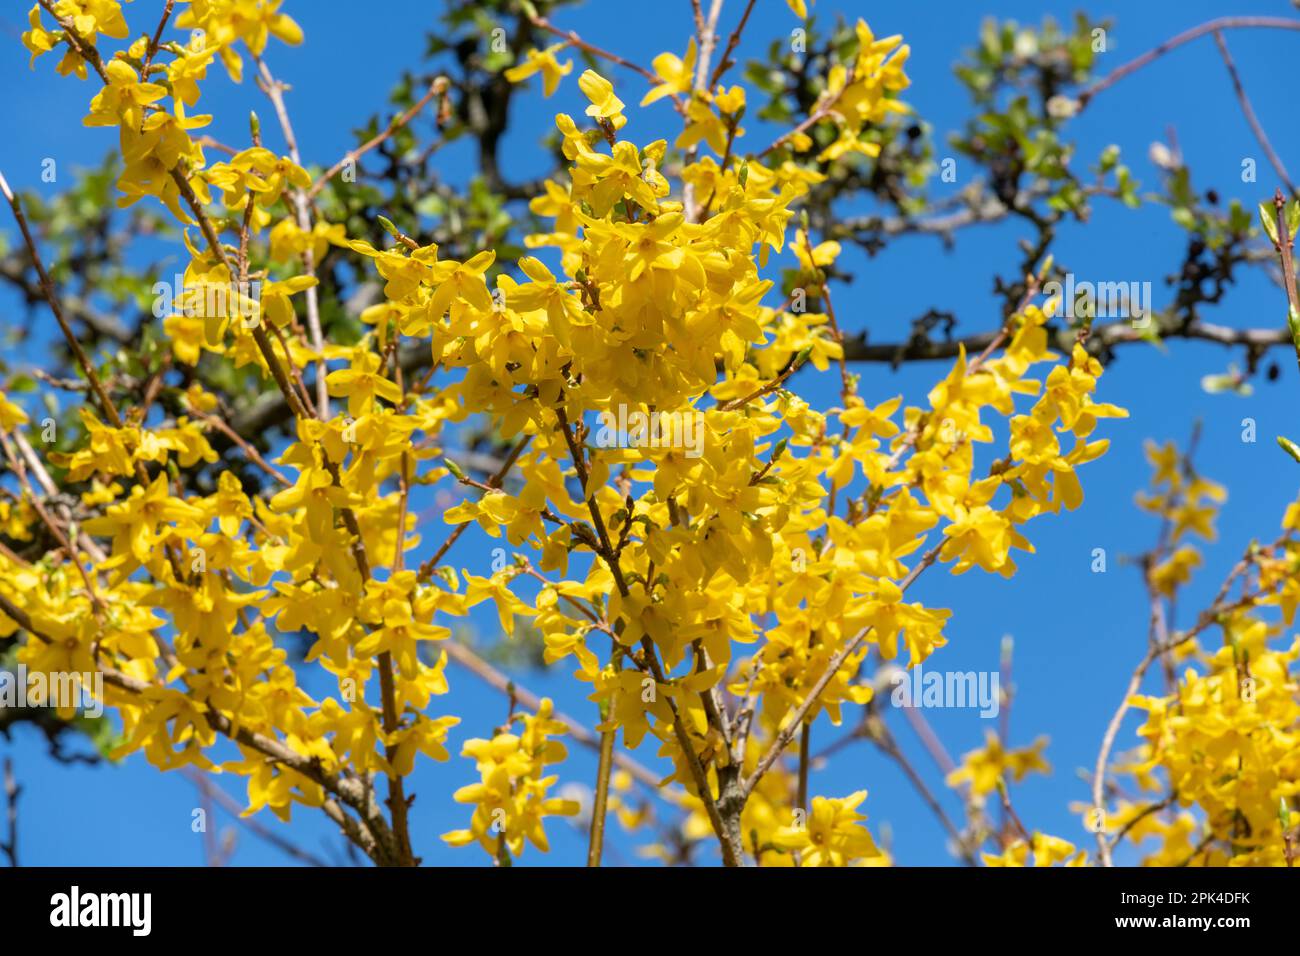 Bright yellow Forsythia bush in full flower against a background of clear blue sky in a spring garden. Stock Photo